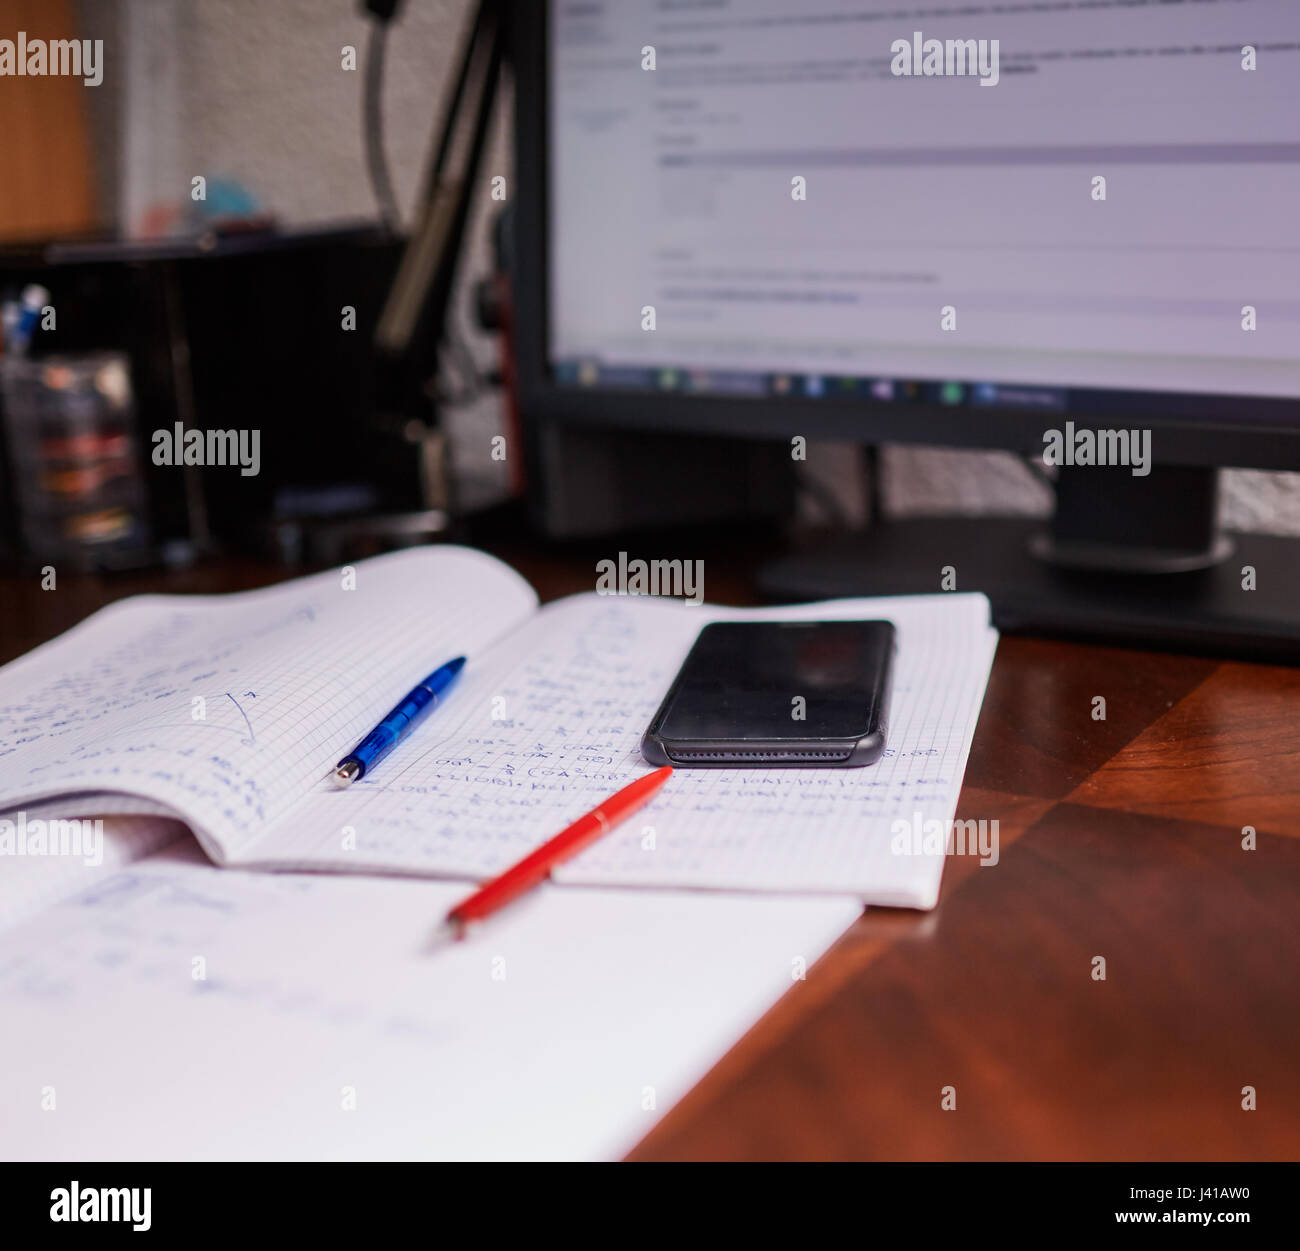 Teenager boy doing homework on his desk at home Stock Photo